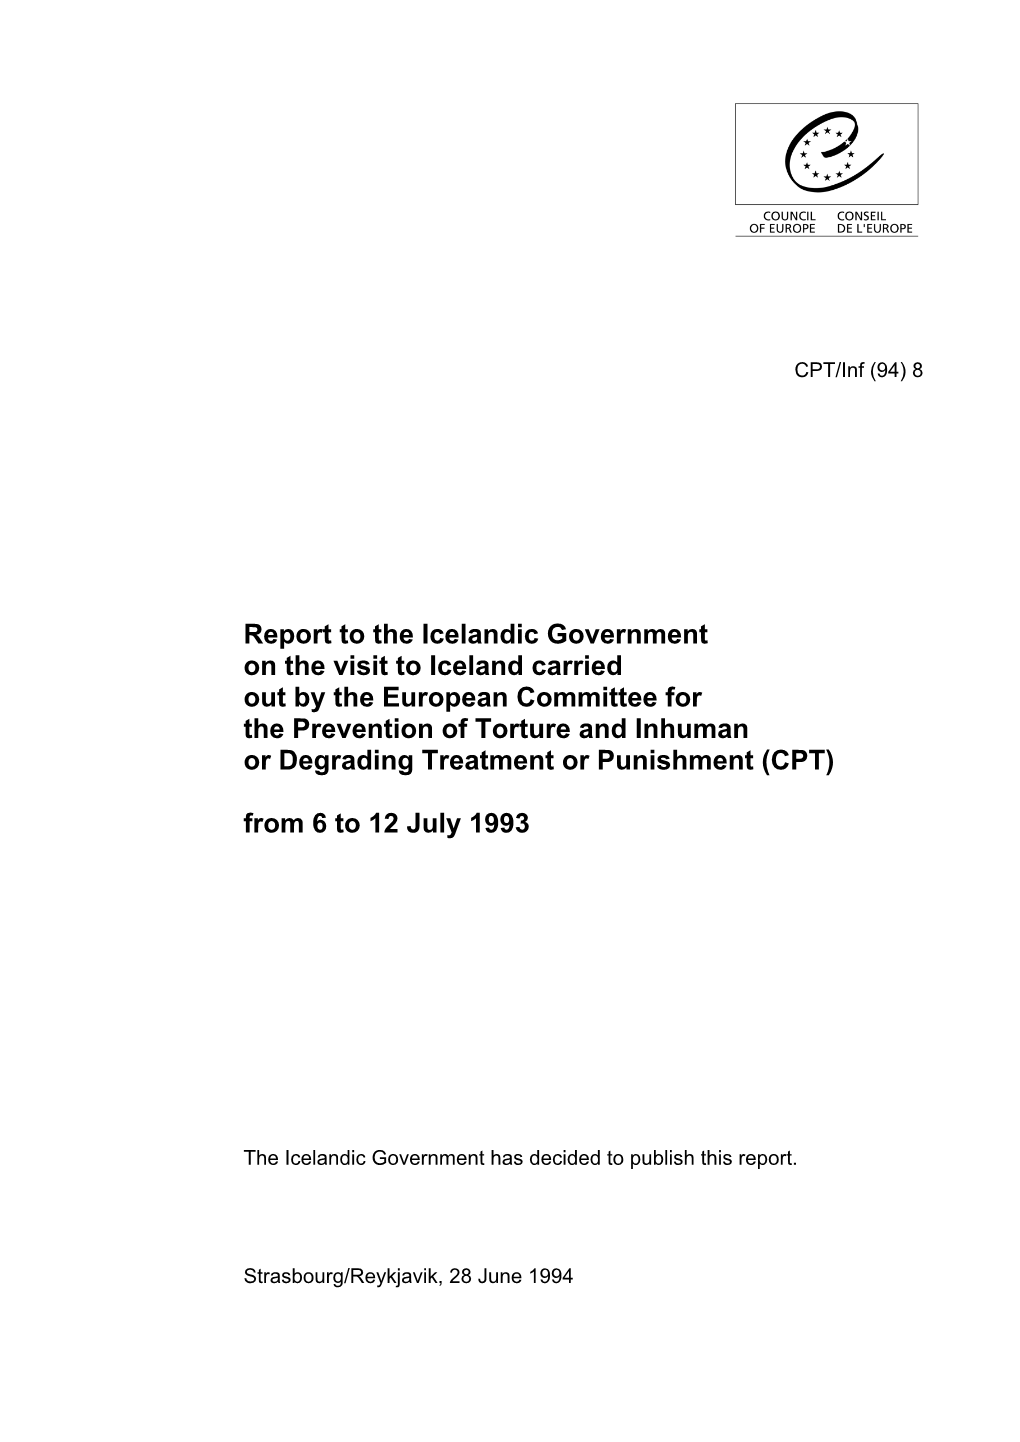 Report to the Icelandic Government on the Visit to Iceland Carried out By